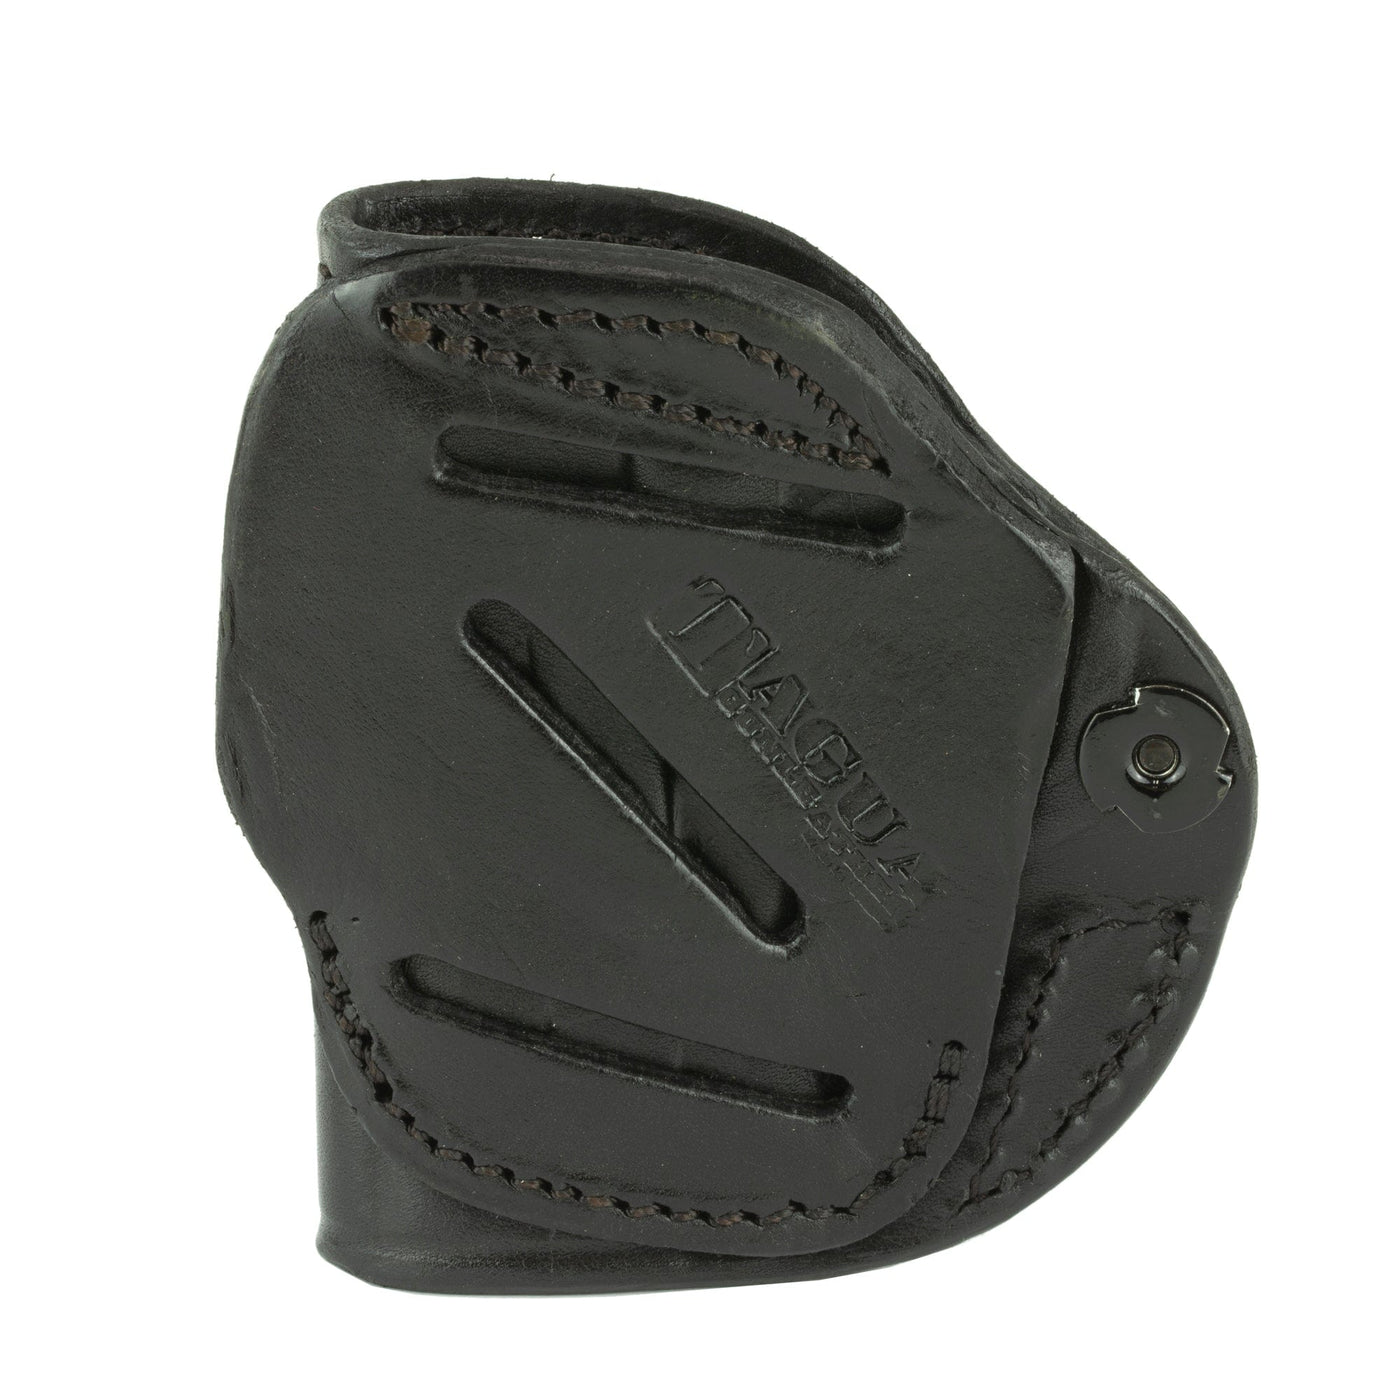 Tagua Tagua 4 In 1 Inside The Pant - Holster Sig P-938 Black Rh Holsters